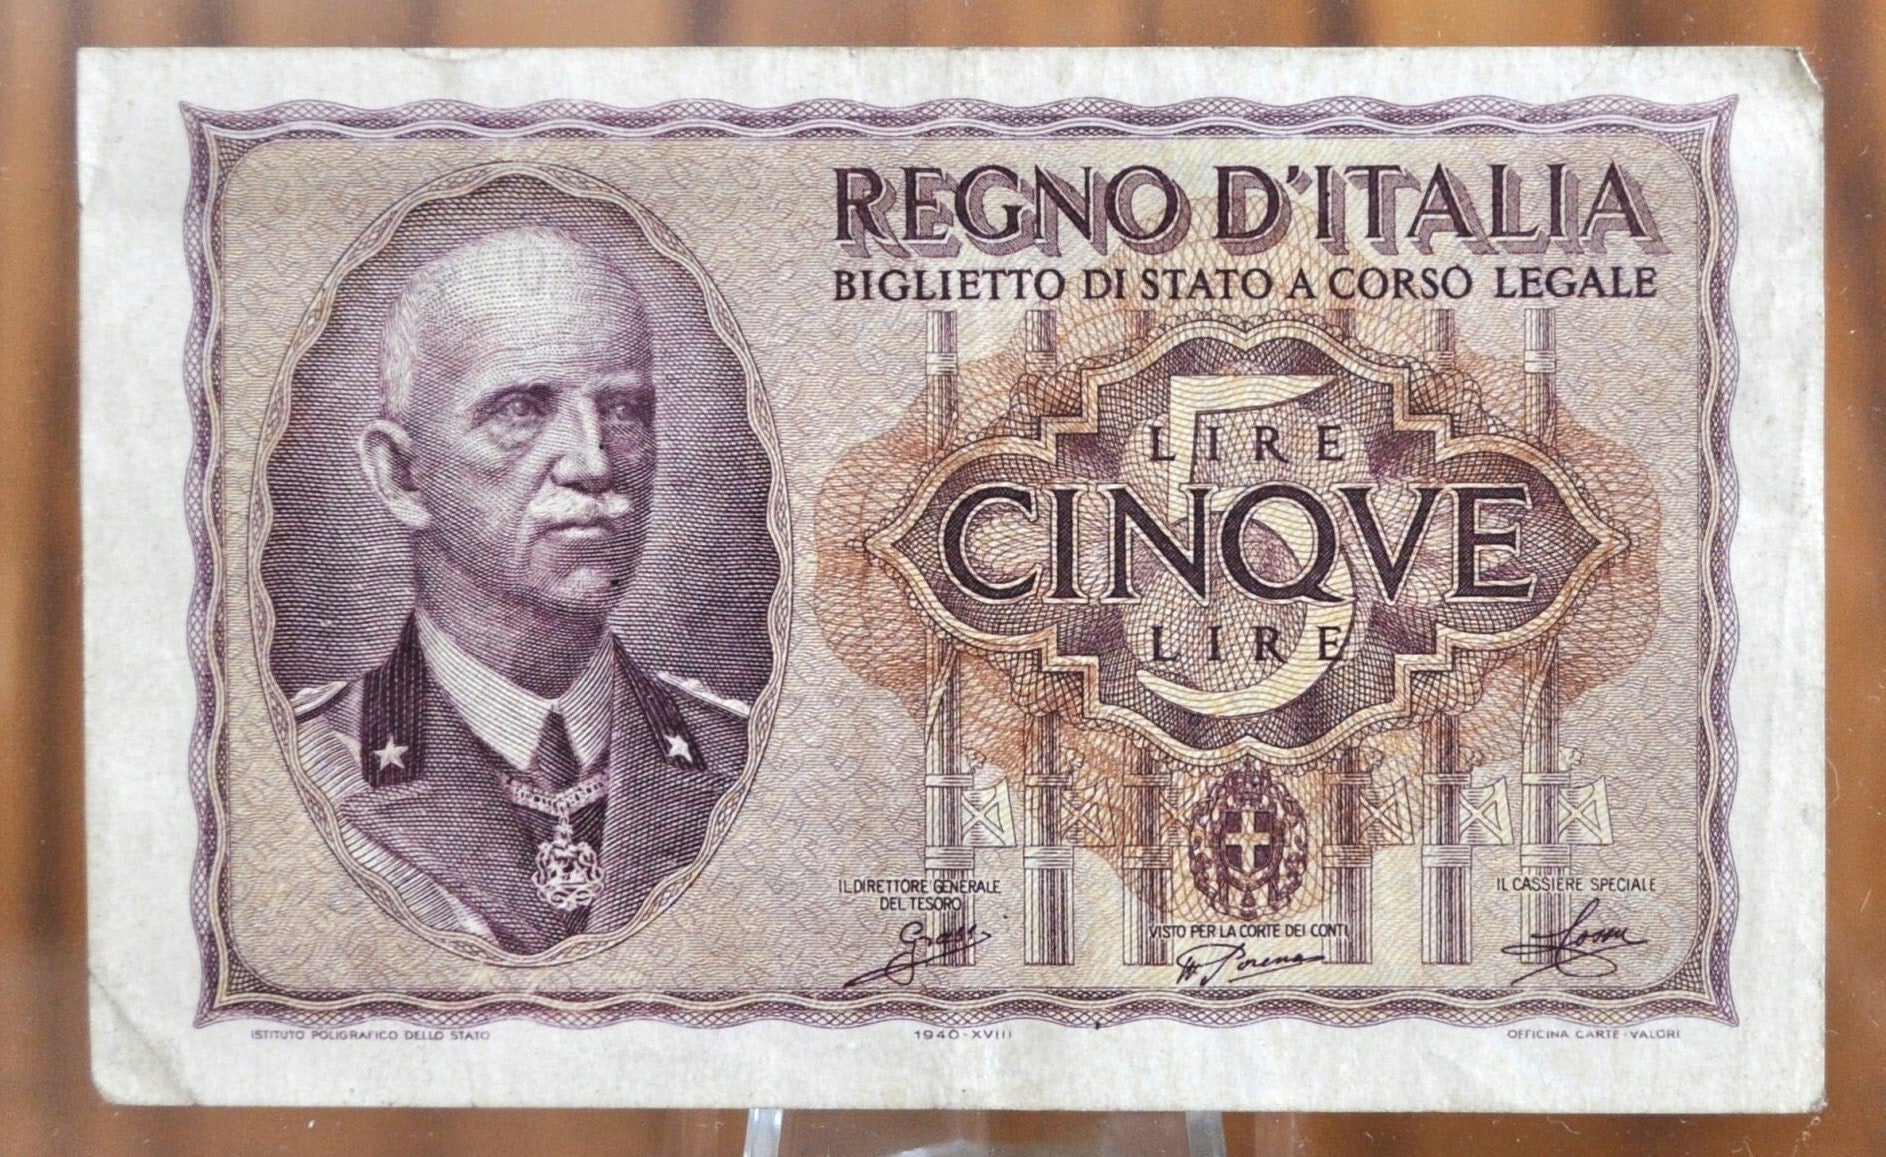 1940 5 Lire Italian Banknote - XF+ Grade - Italy Five Lire Cinque Lire Banknote 1940 King Vittorio Emanuele III, Cool Old Banknote from WWII